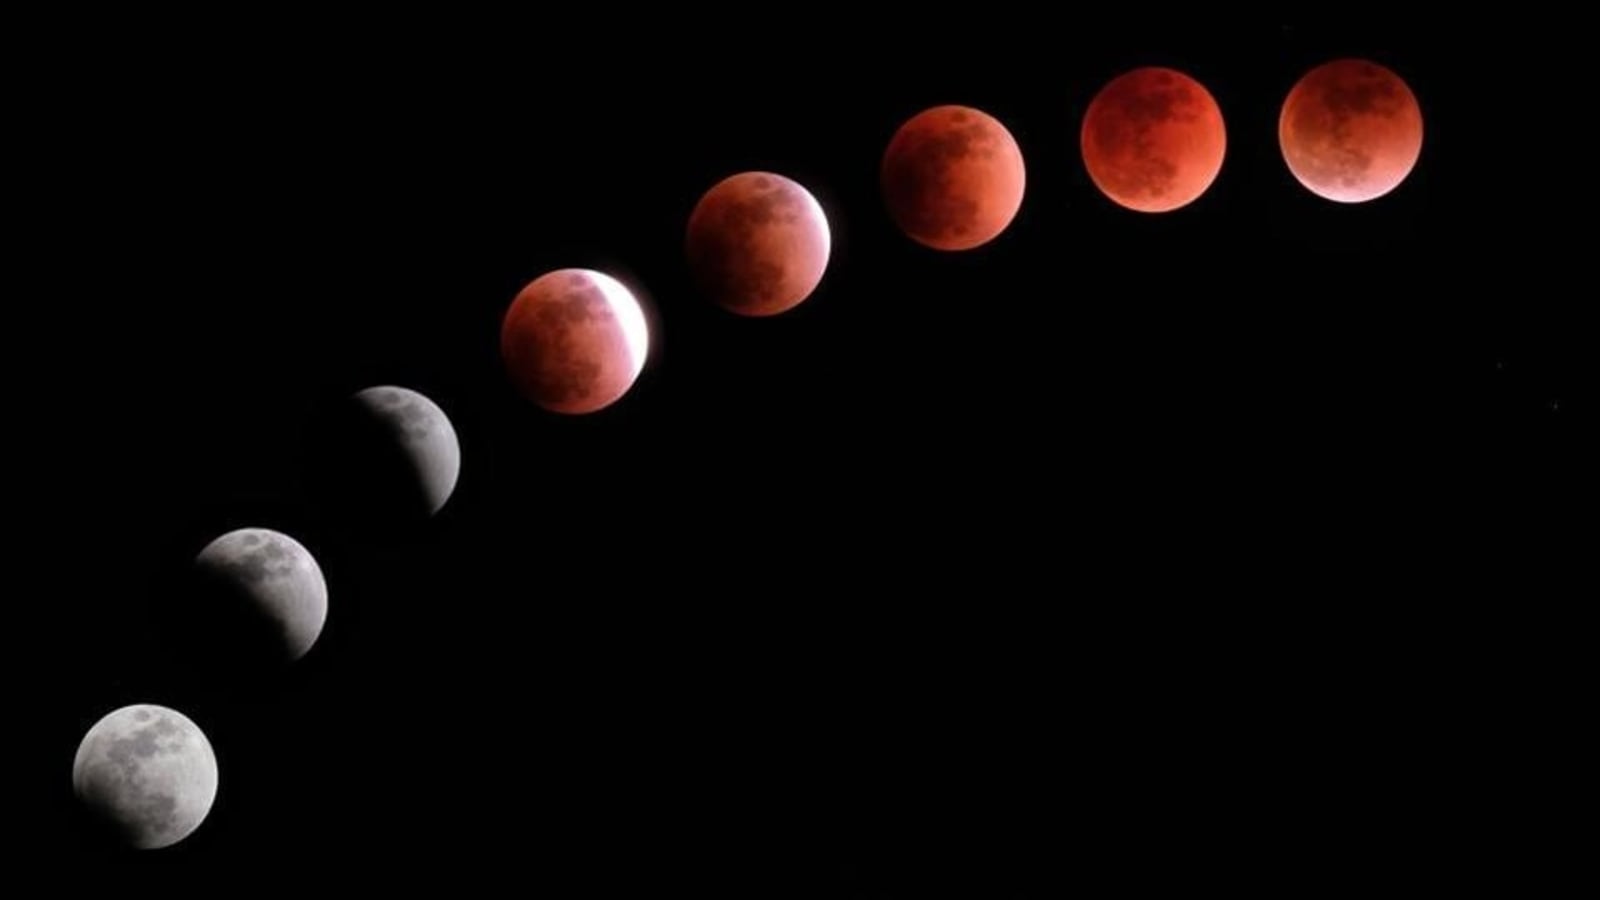 How a total lunar eclipse is different from partial lunar eclipse